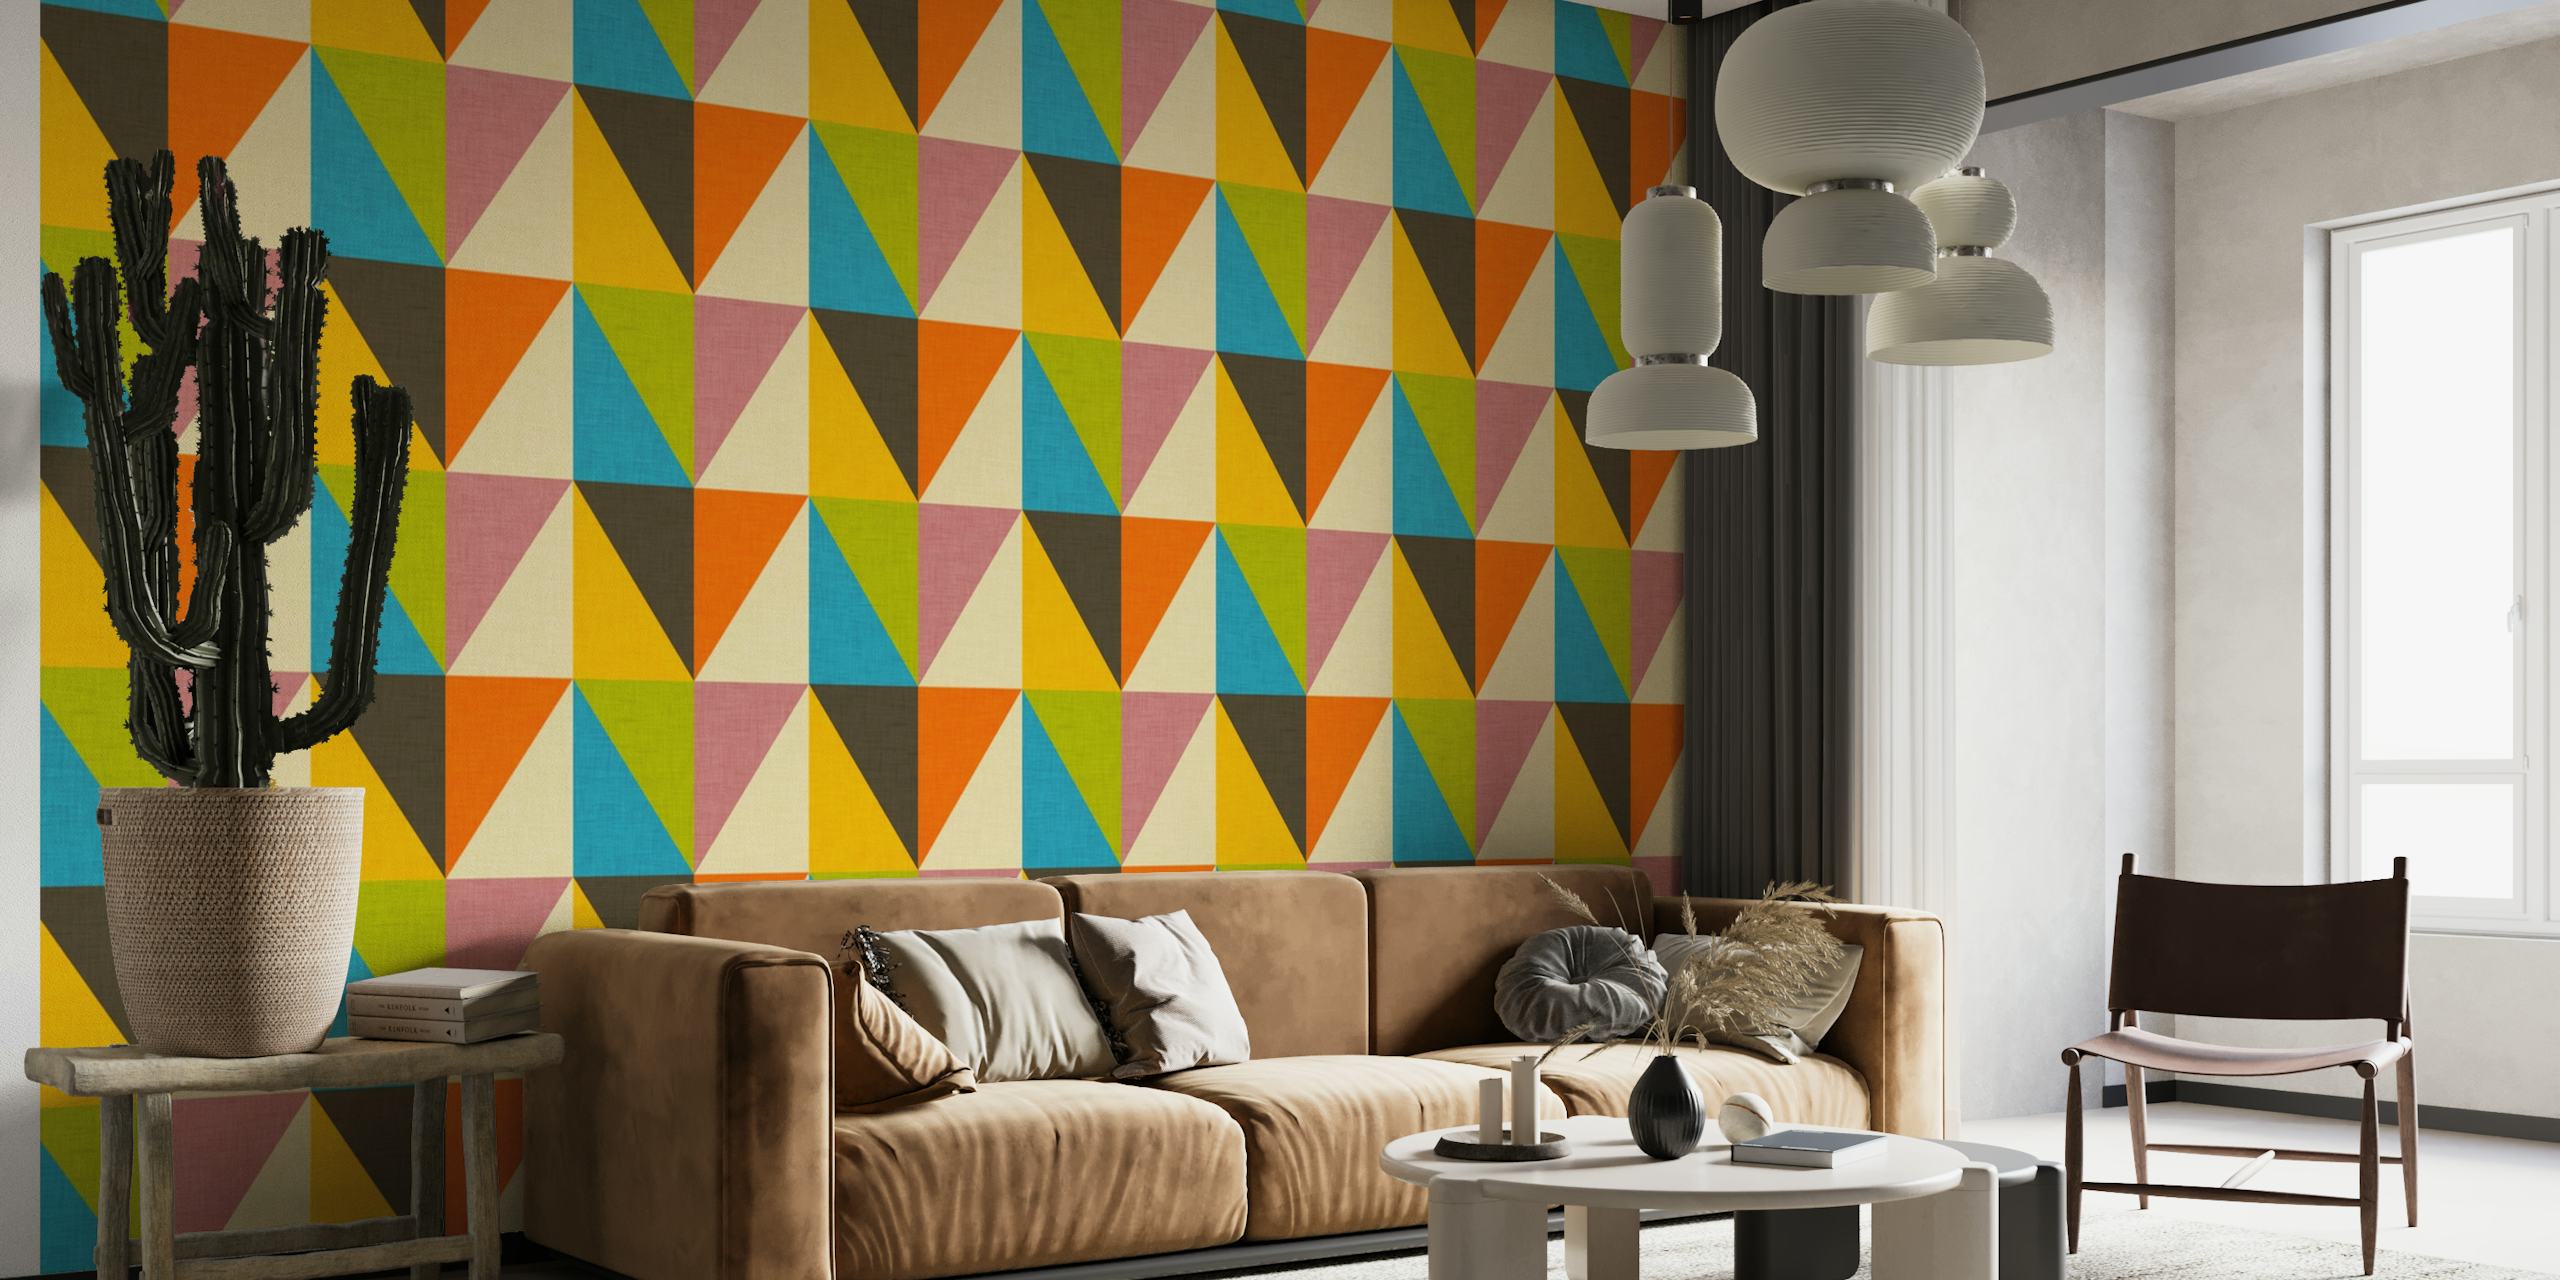 Retro Color Block Chevron wall mural with a pattern of colorful chevron stripes in vintage tones